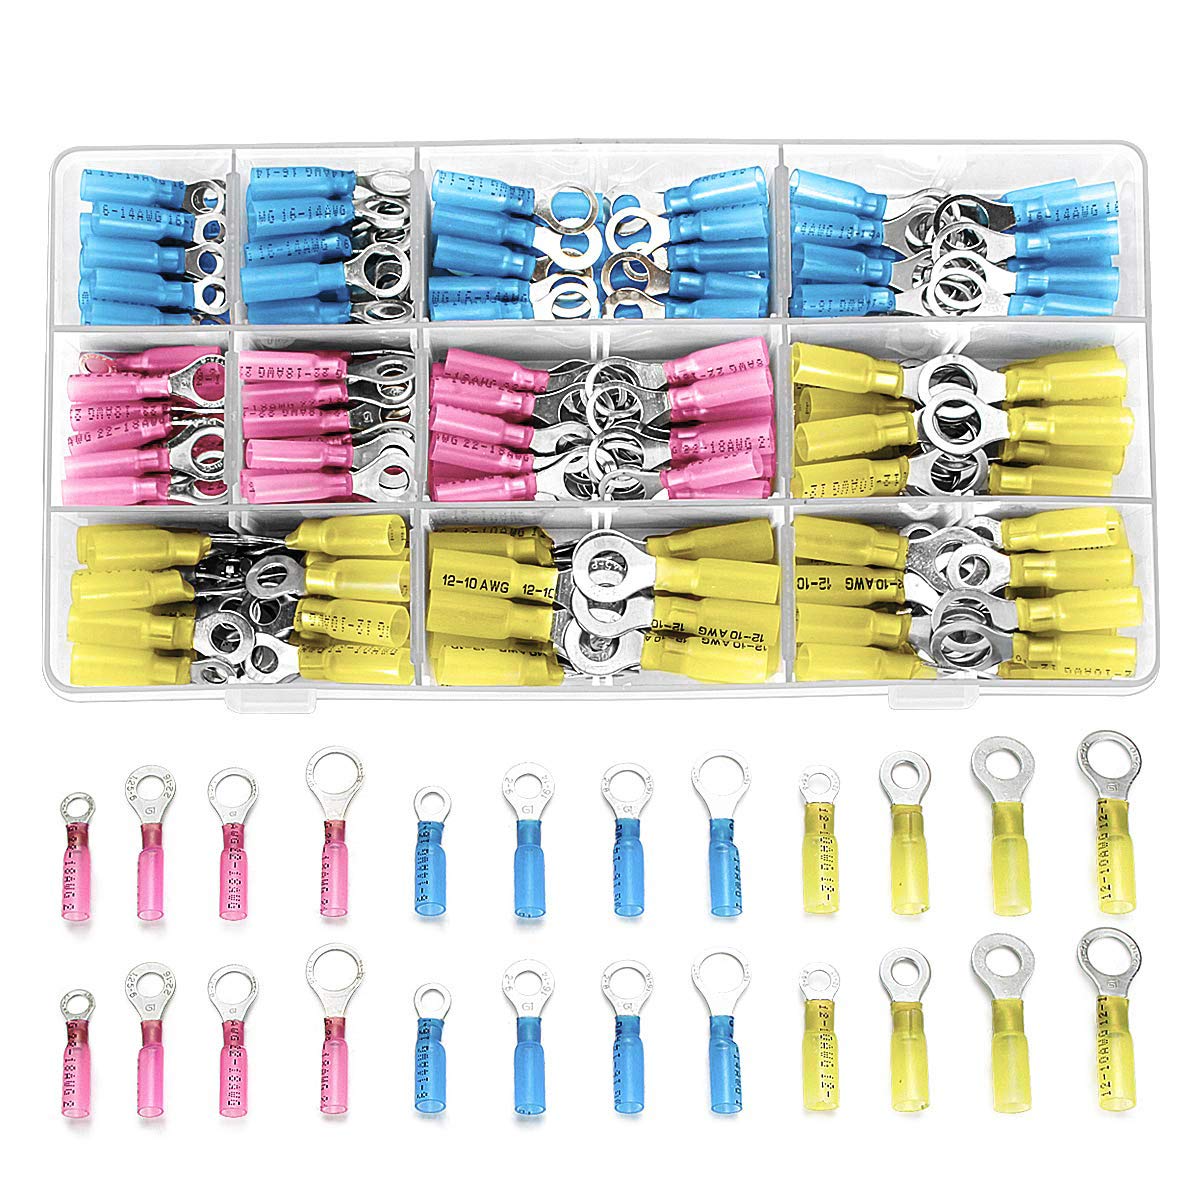 Heat Shrink Ring Connectors 300 PCS Insulated Electrical Crimp Heat Shrink Wire Connectors Marine Automotive Copper Ring Terminals Kit